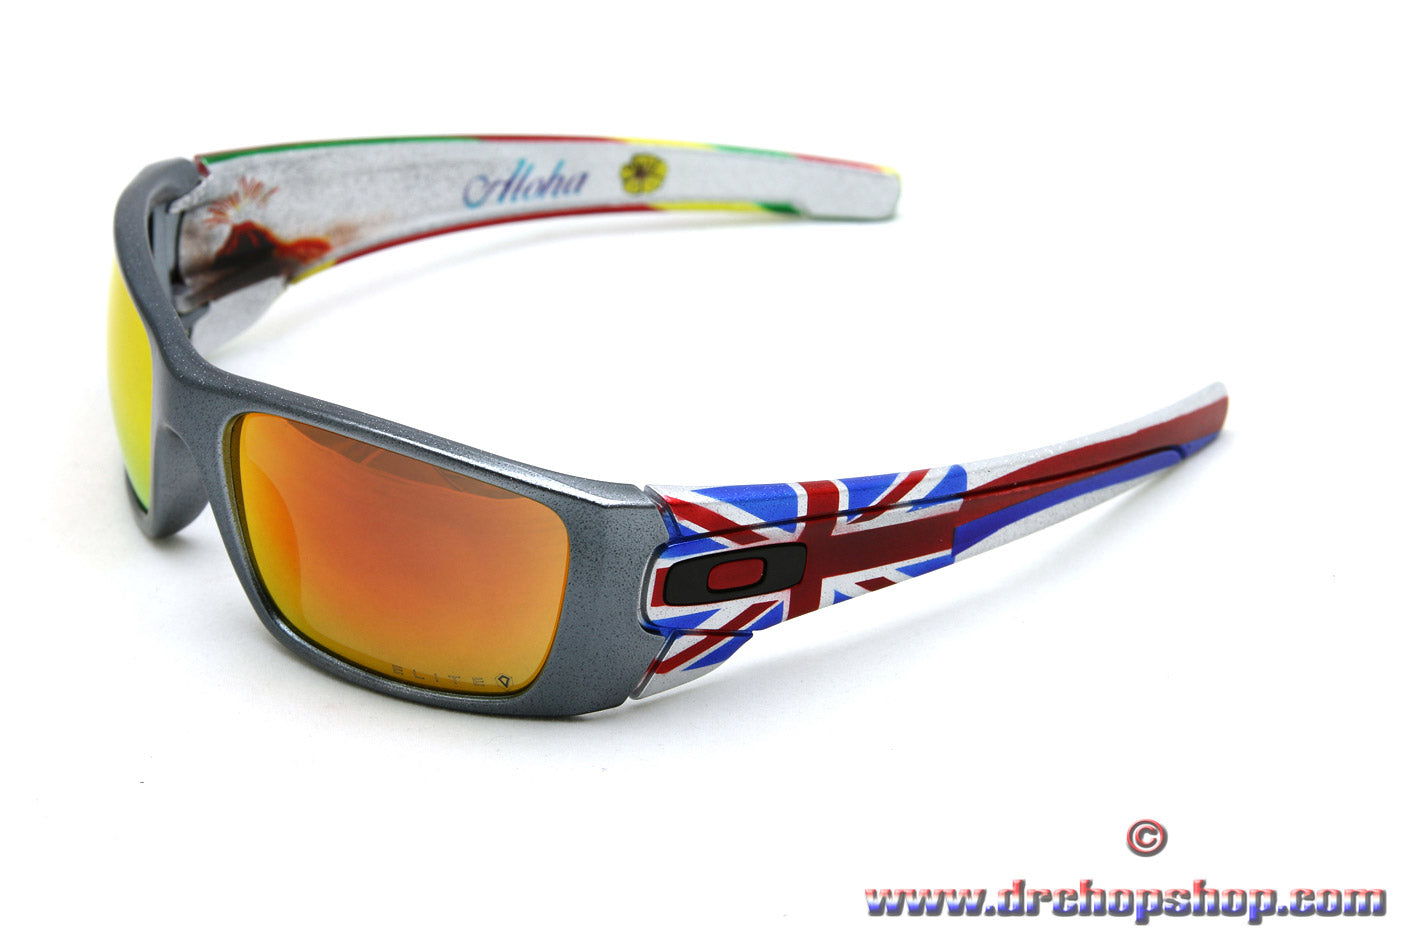 Customized Oakley Sunglasses Painted by Dr. Chop - Quarter Turn Profile